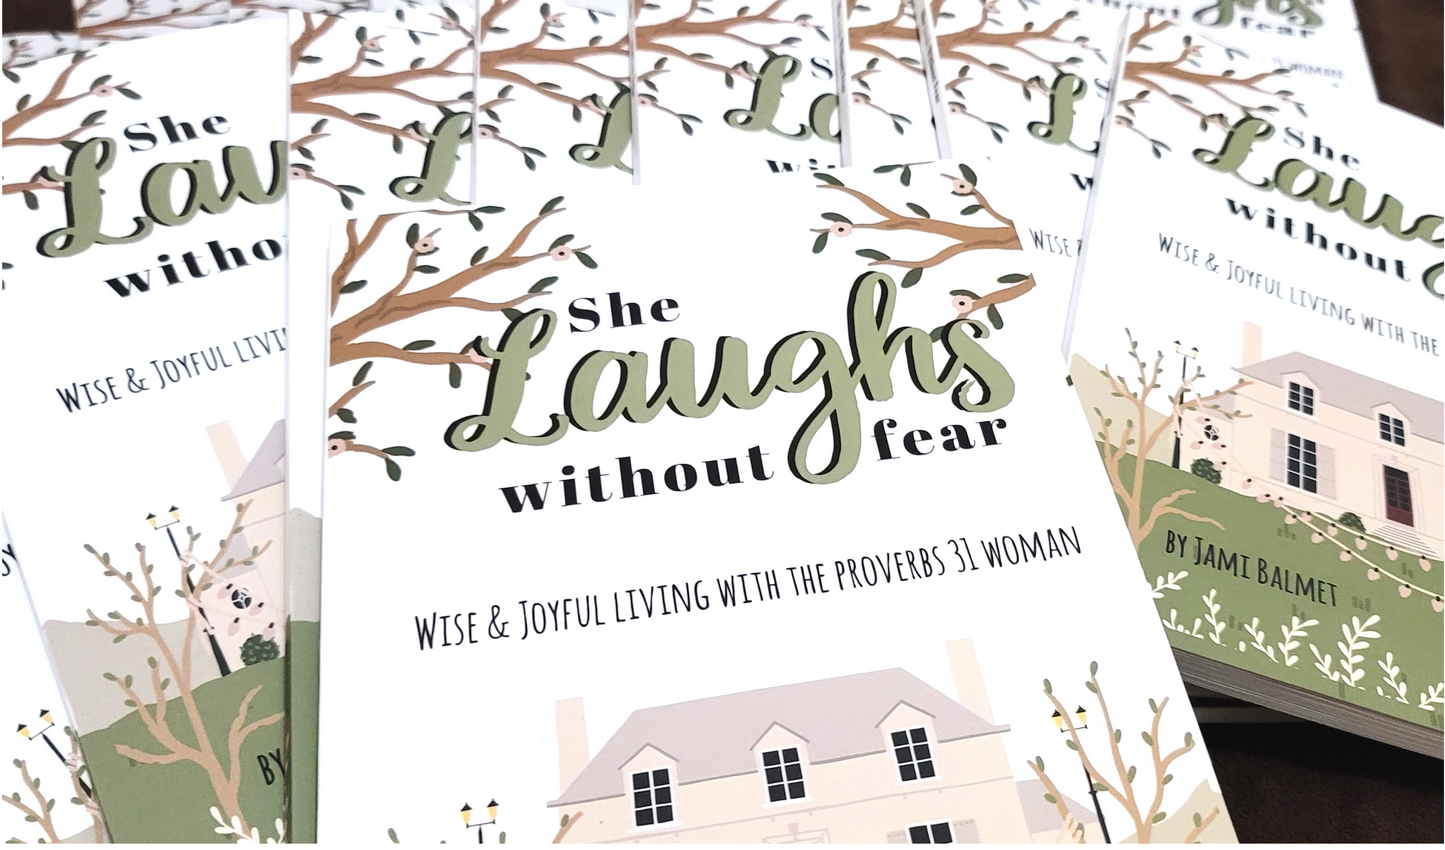 She Laughs Without Fear Digital